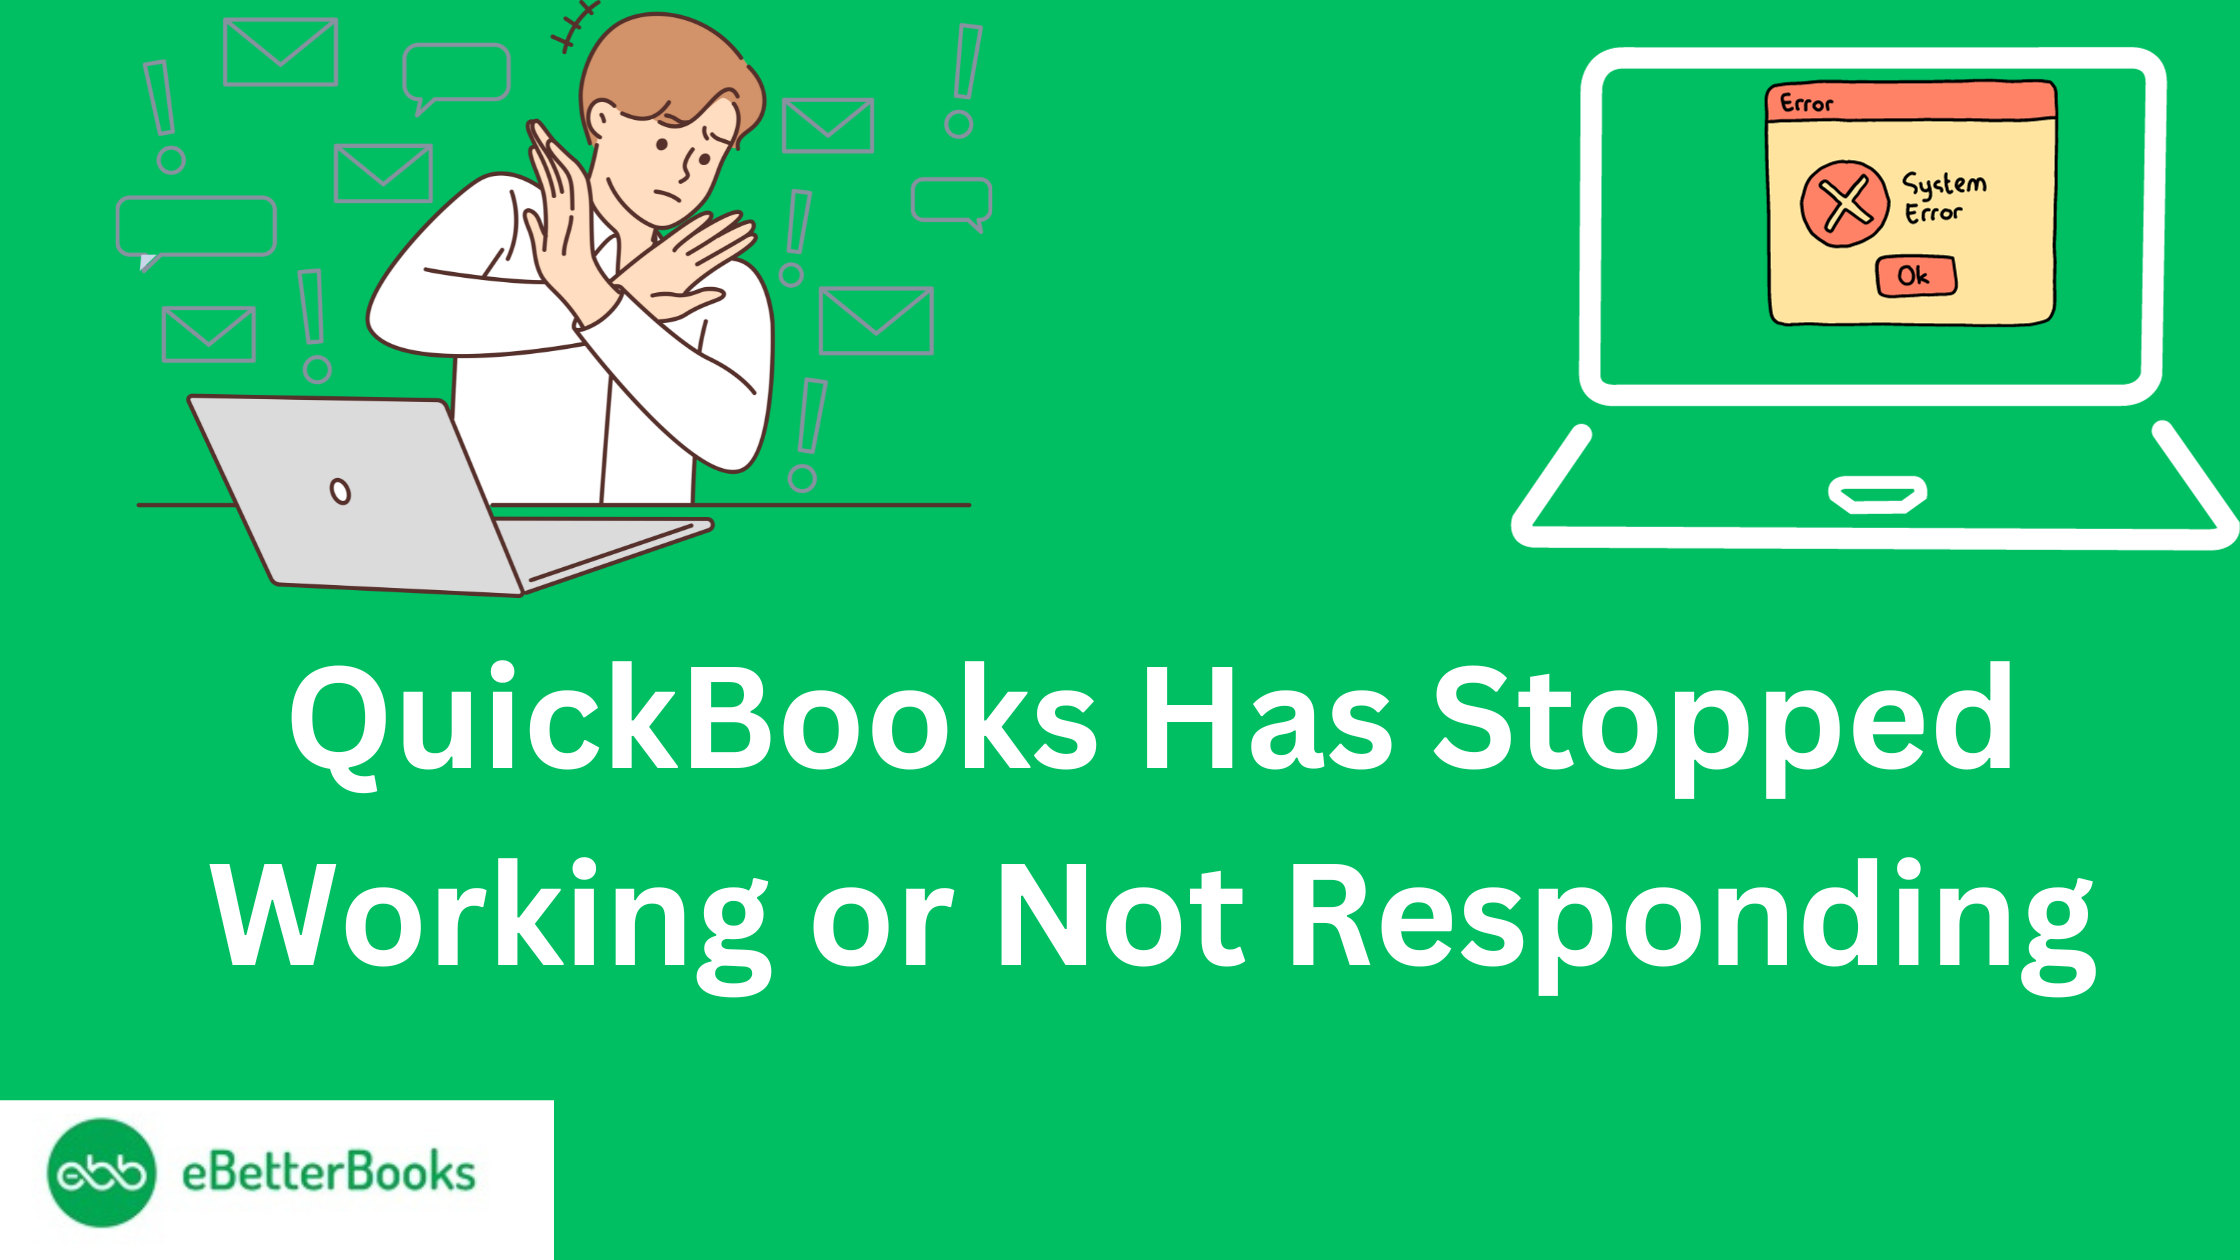 QuickBooks Has Stopped Working or Not Responding